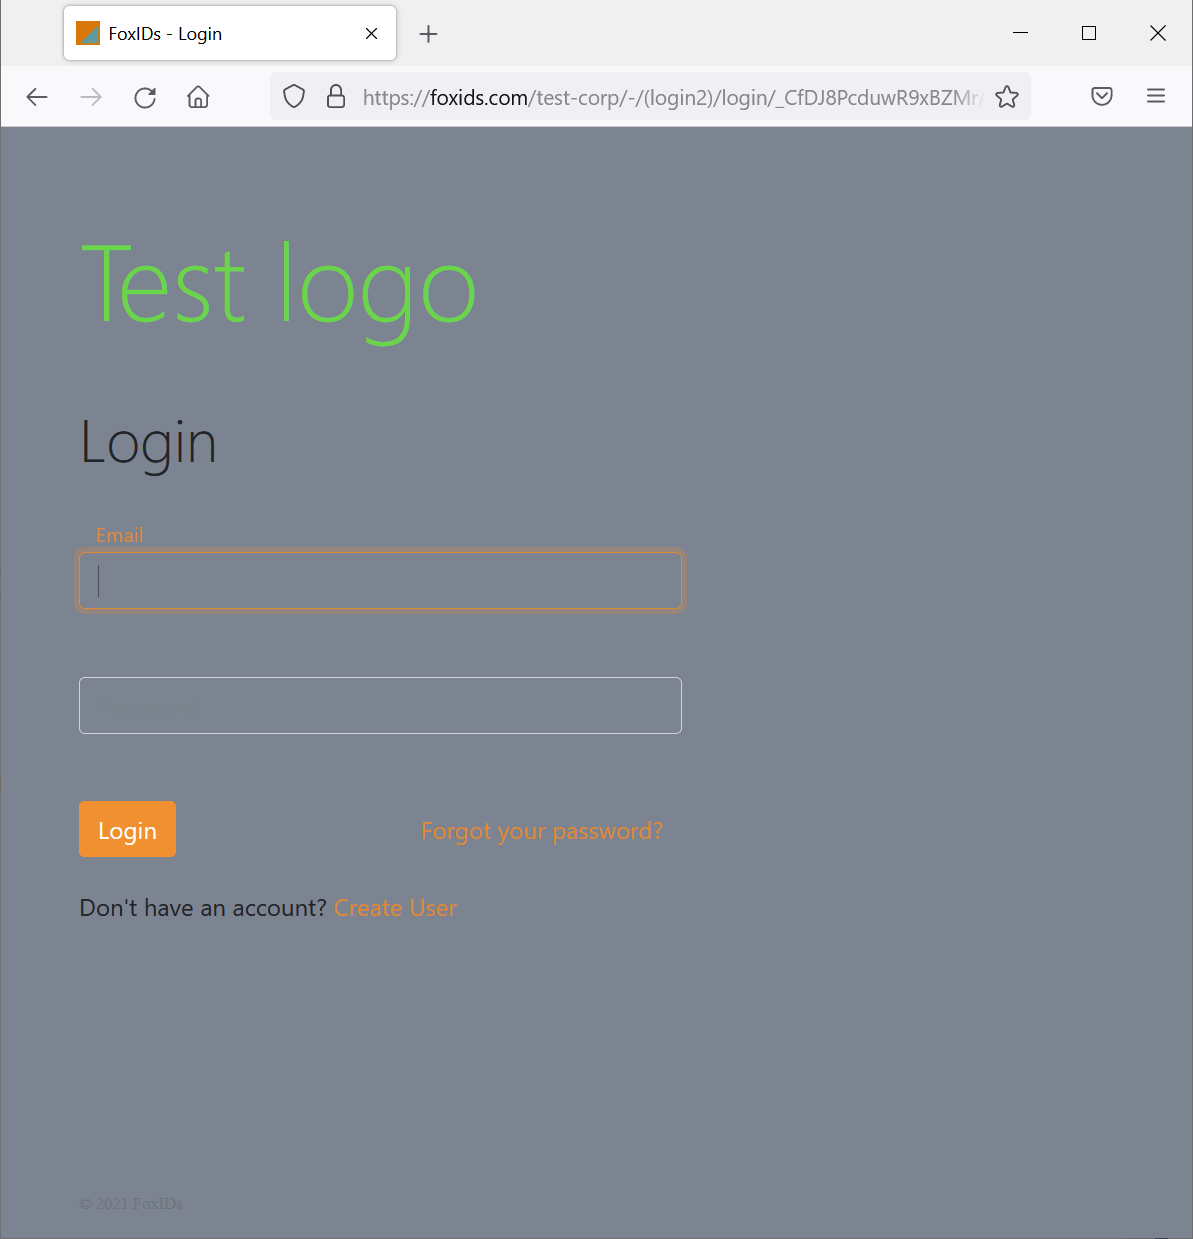 Configure background and add logo with CSS